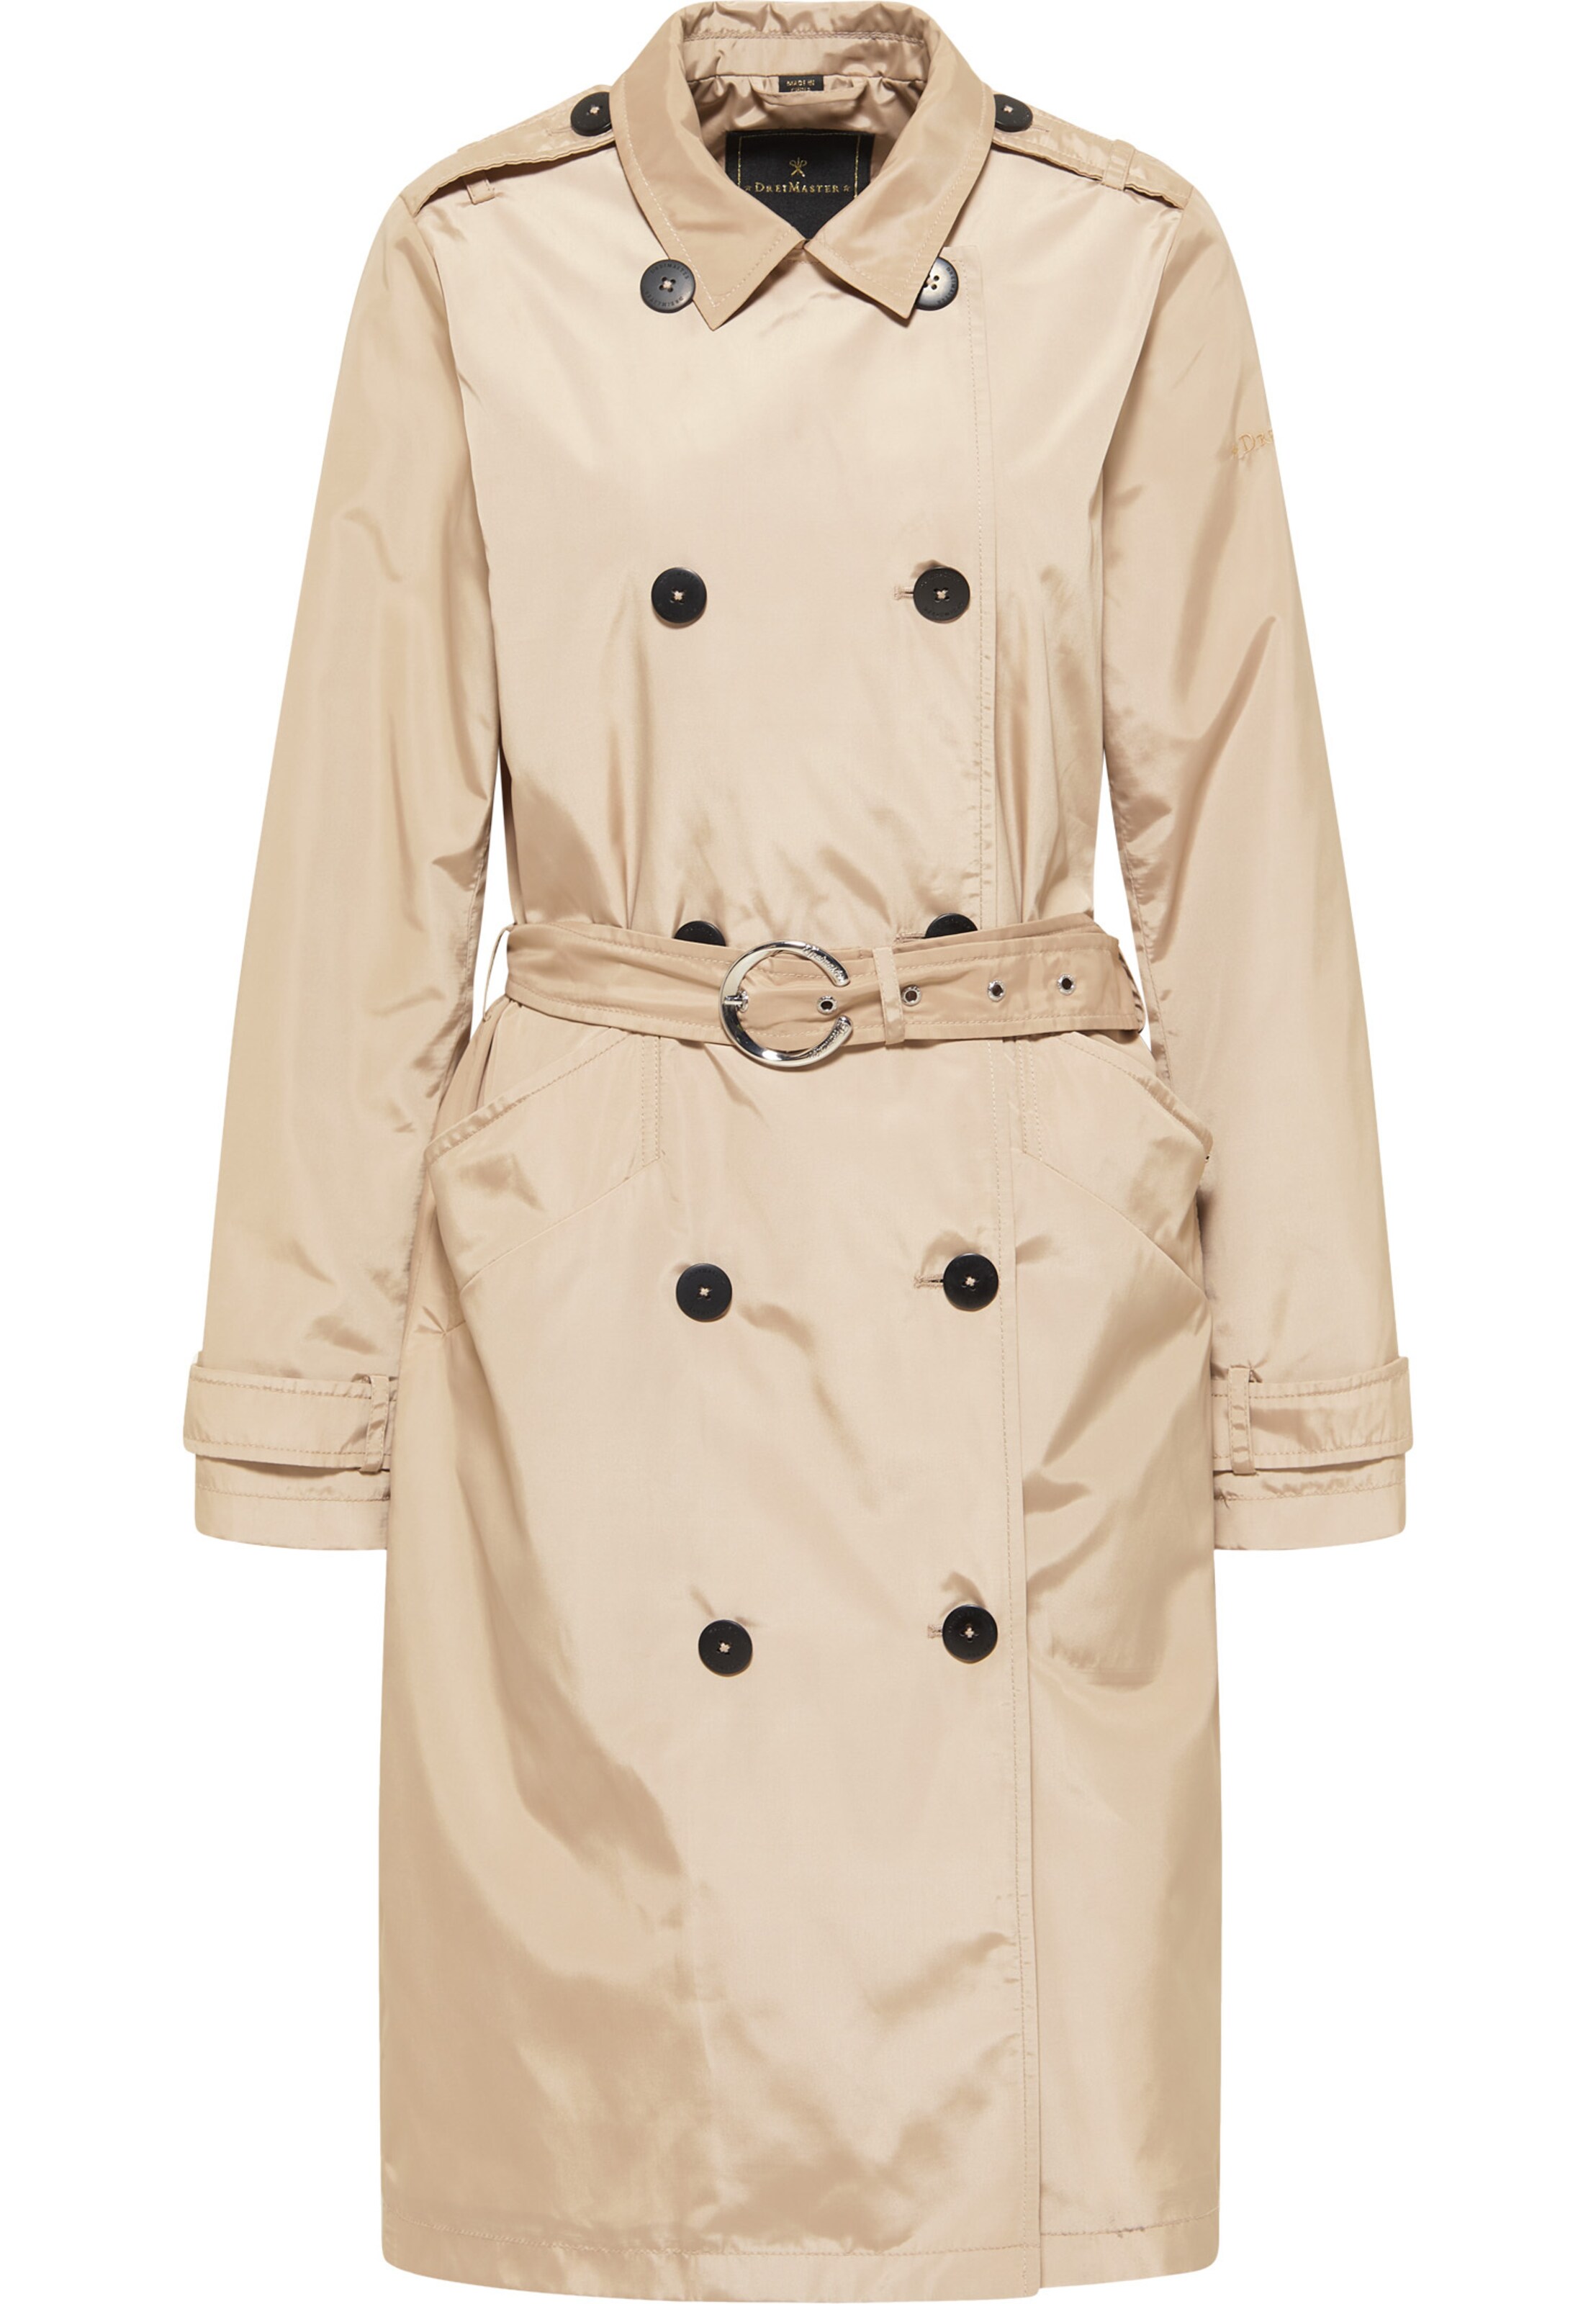 sconto 74% MODA DONNA Cappotti Trench Similpelle Beige M ONLY Trench 